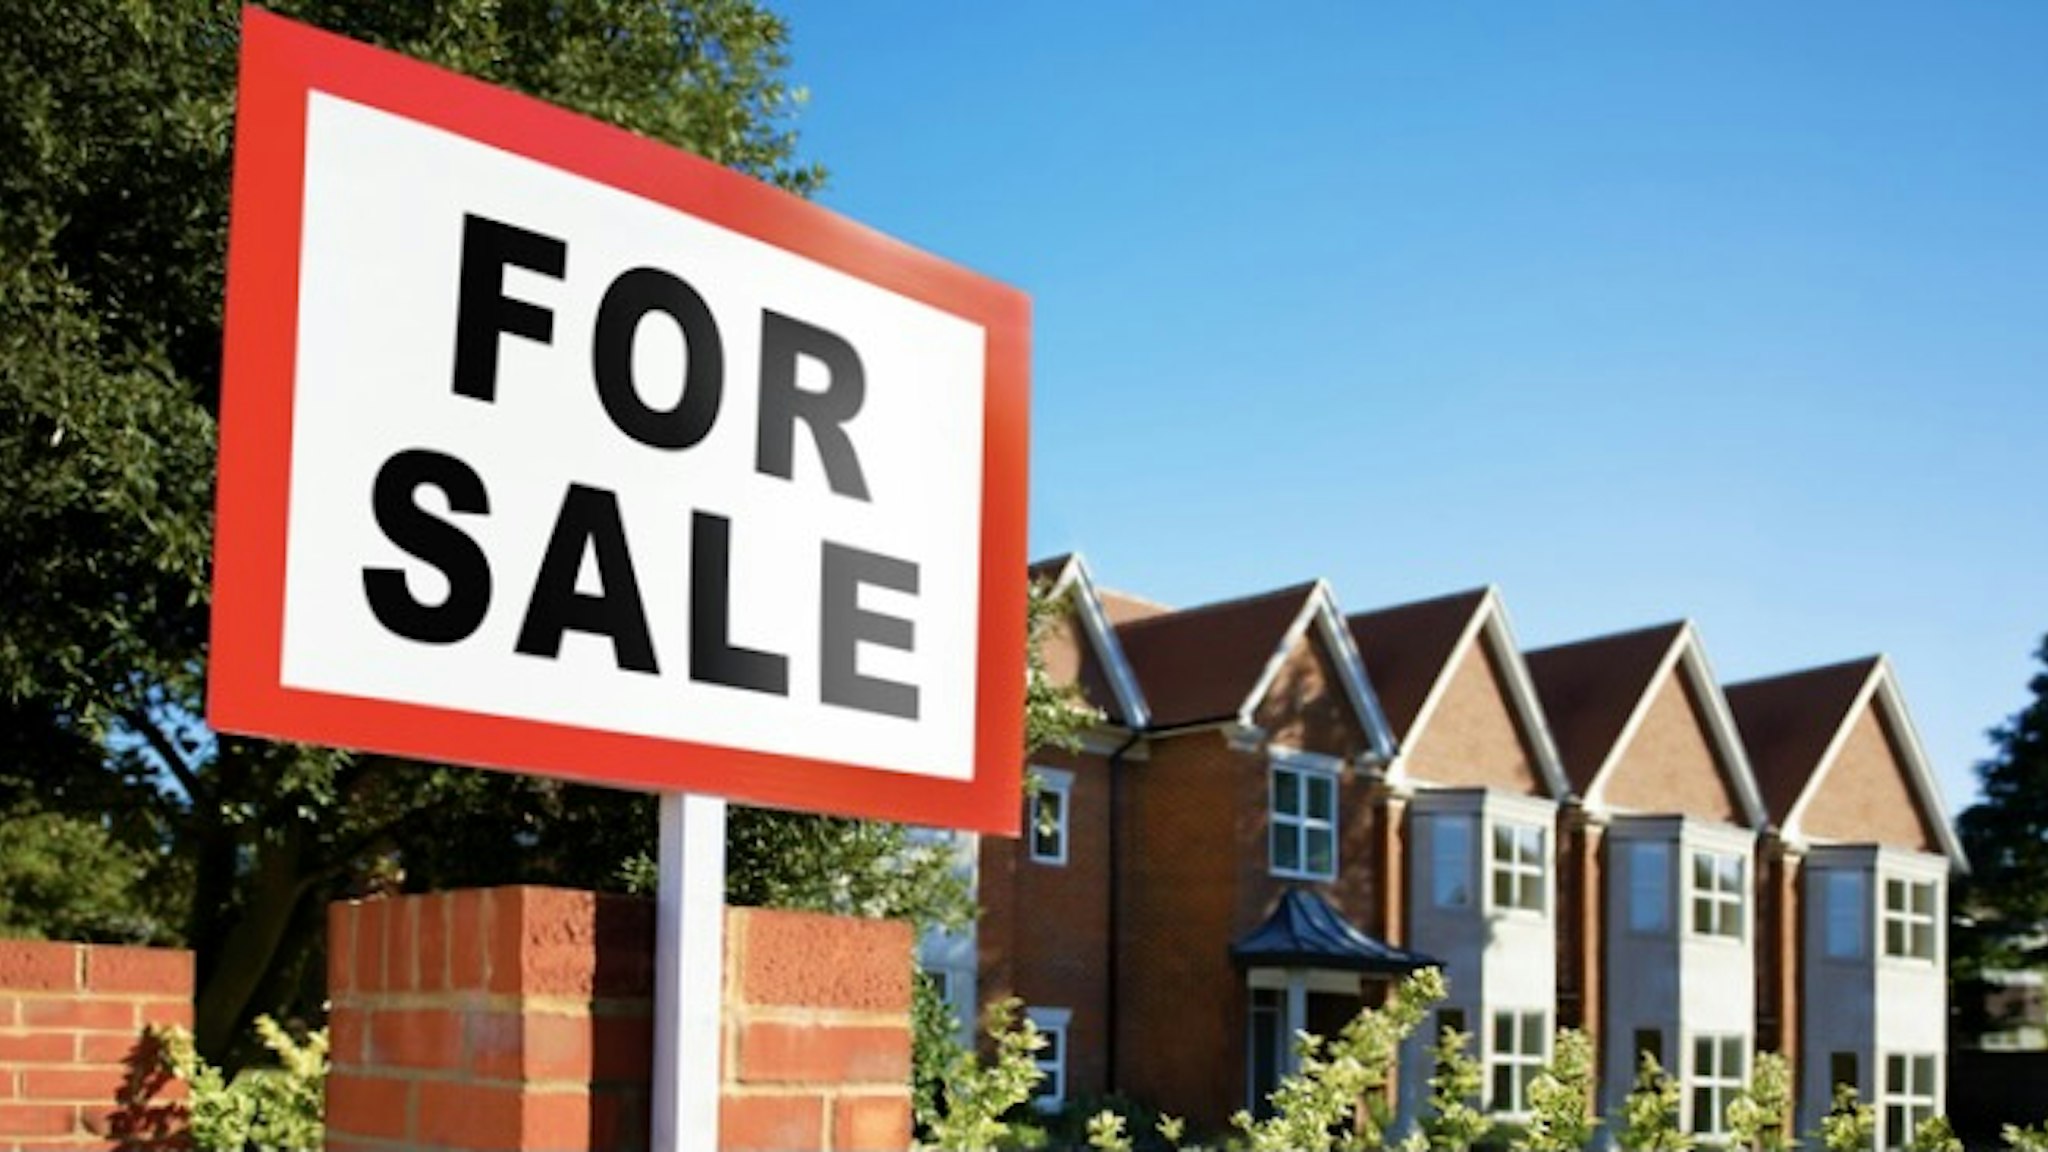 House/flat for sale sign - stock photo